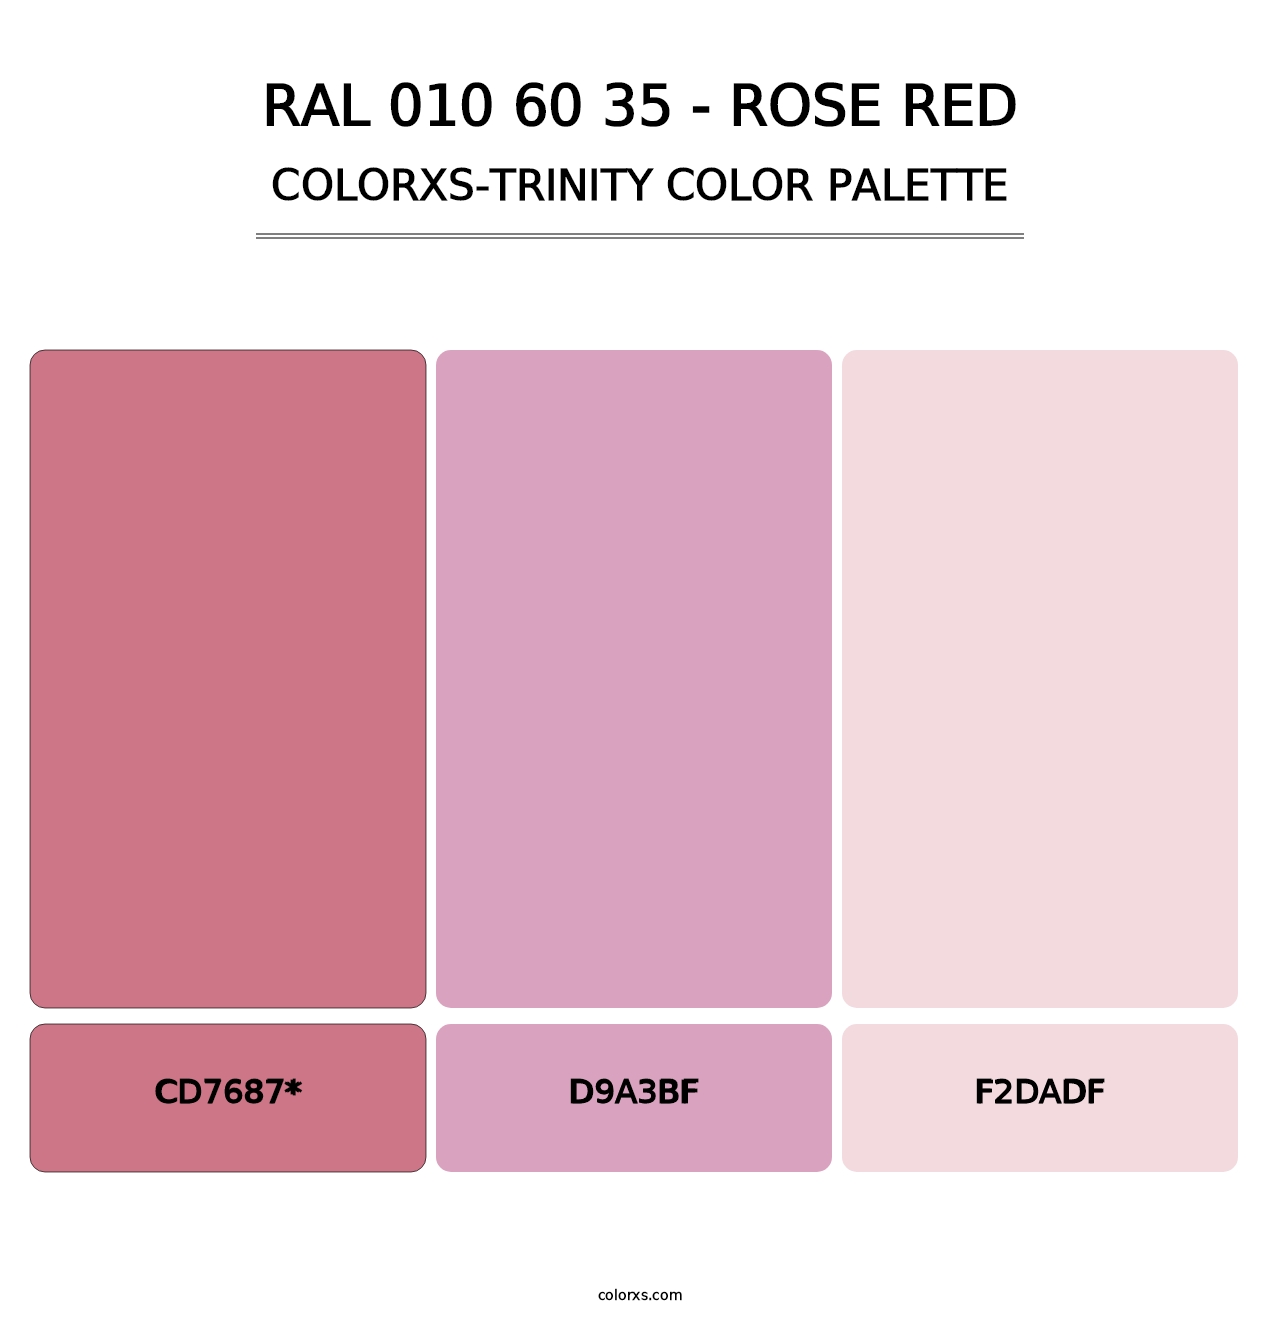 RAL 010 60 35 - Rose Red - Colorxs Trinity Palette